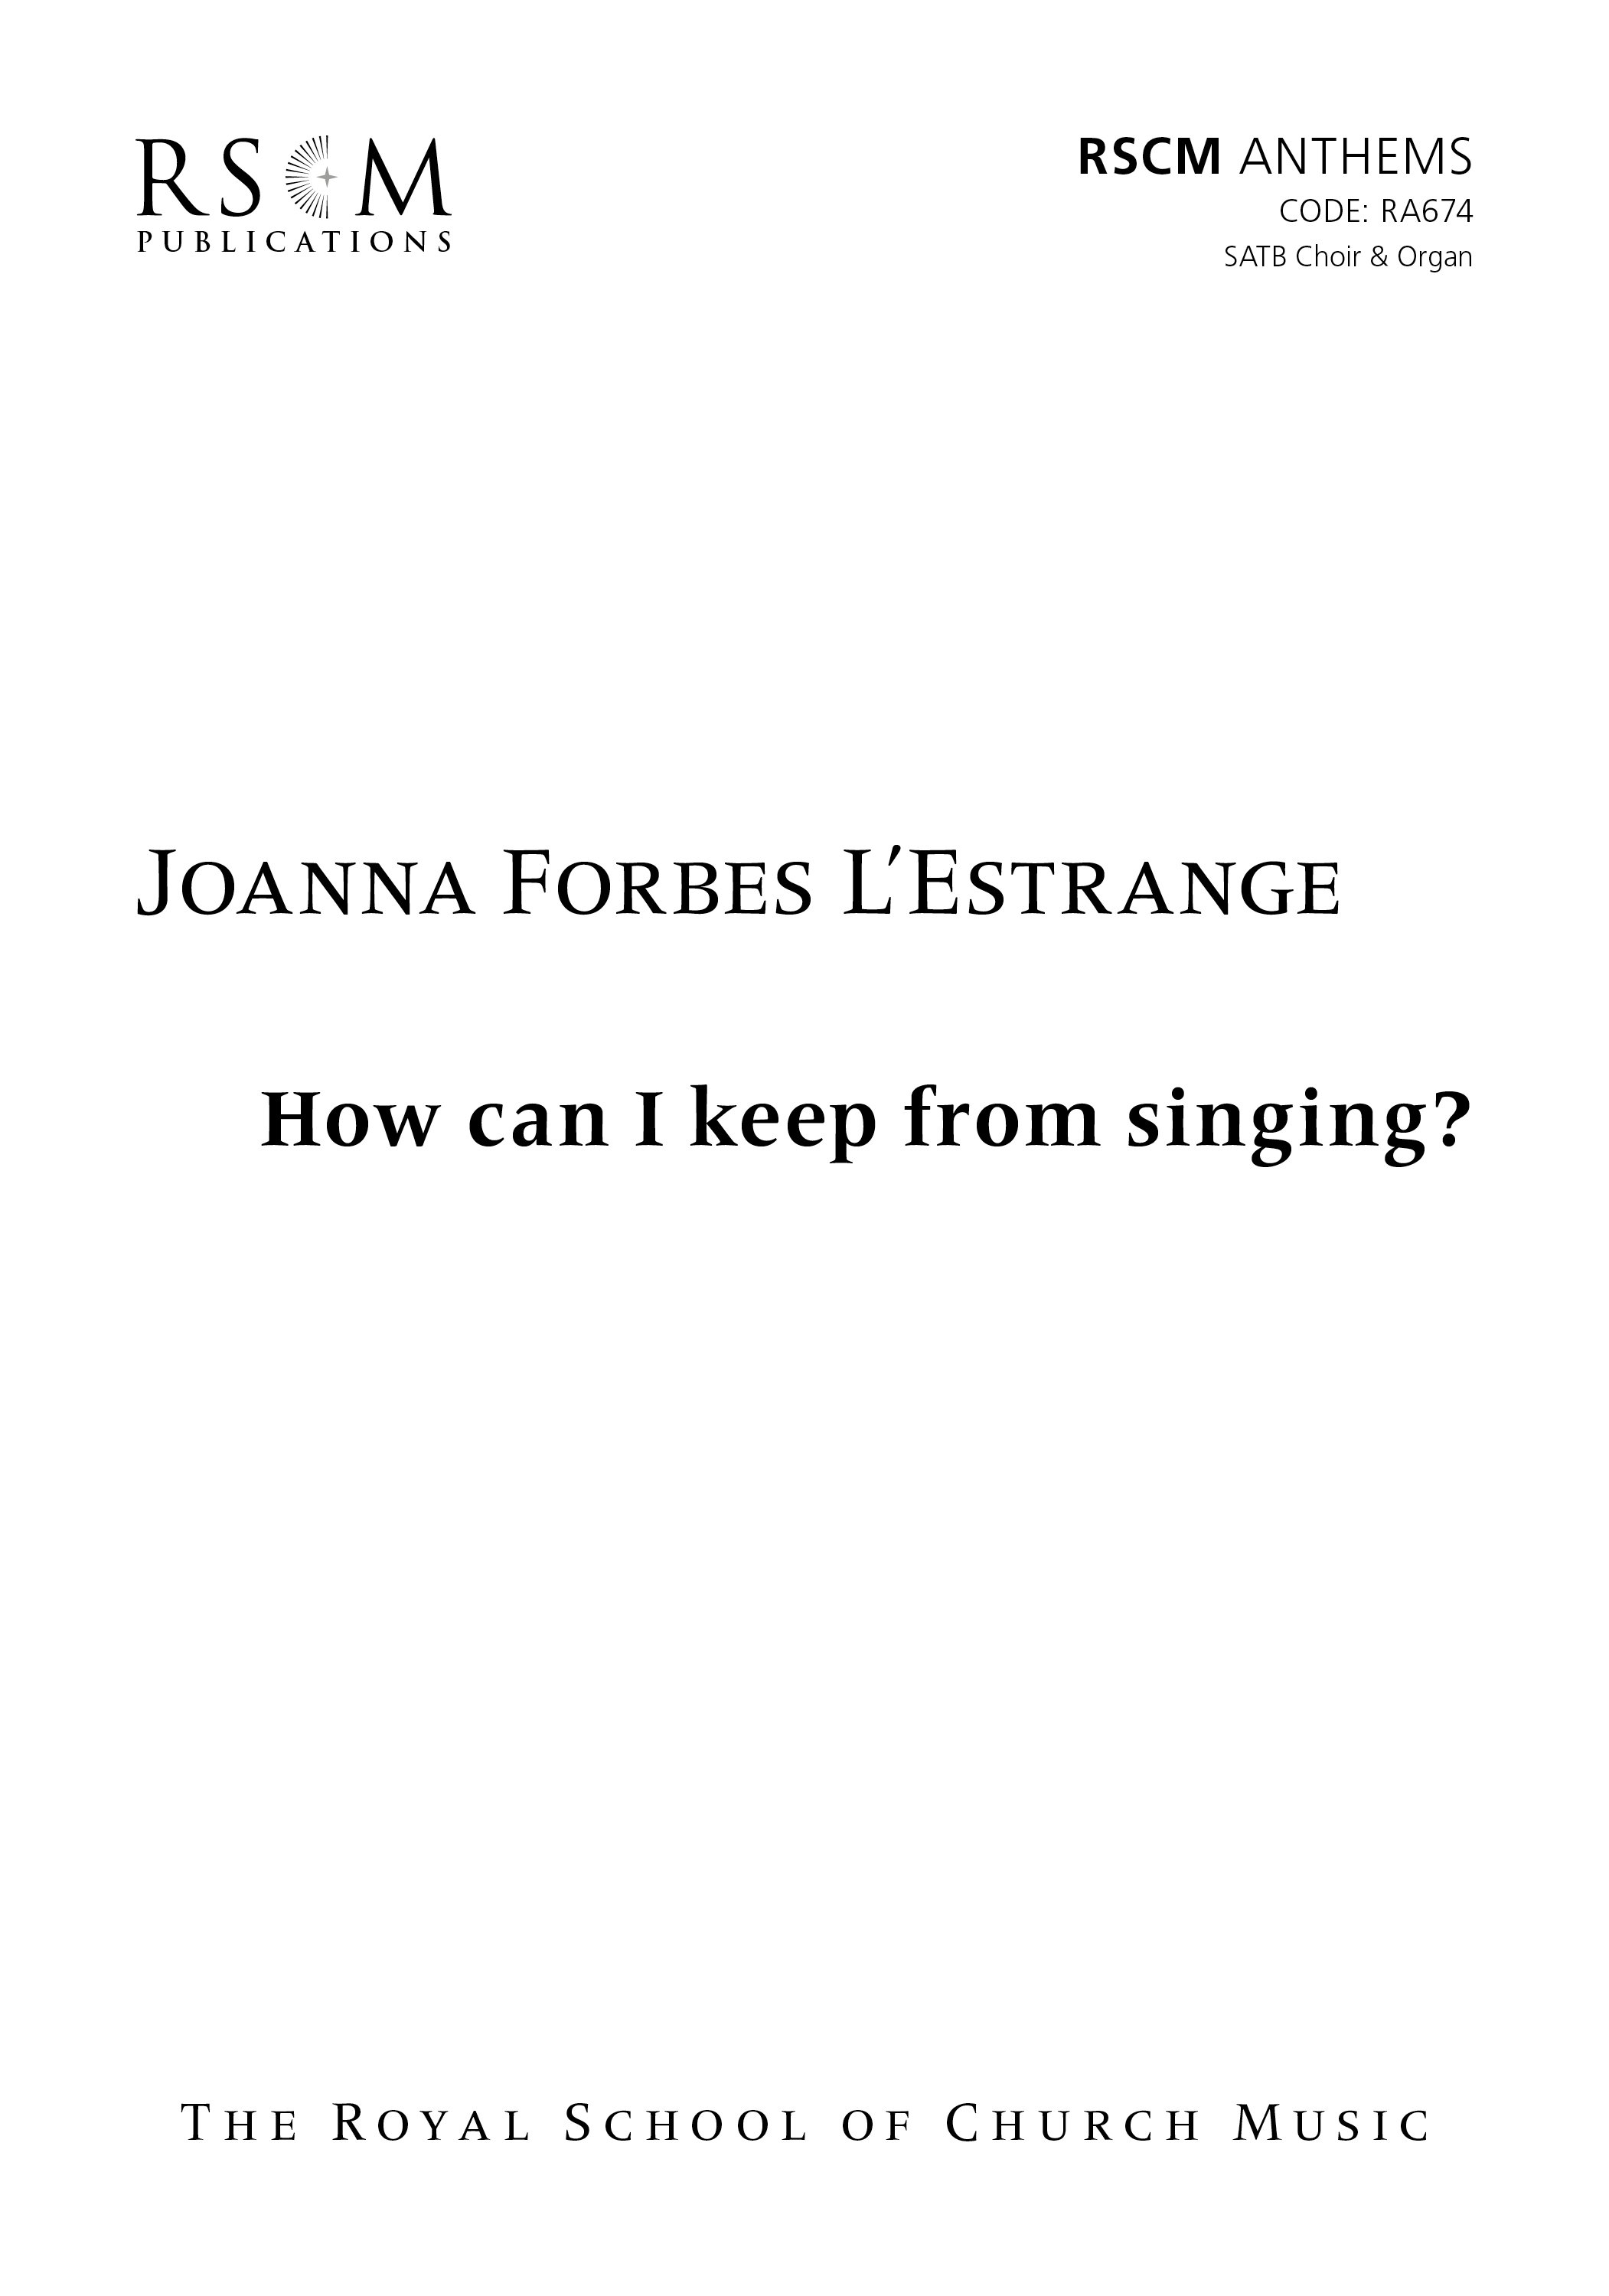 RA674 Forbes L'Estrange How can I keep from singing.jpg